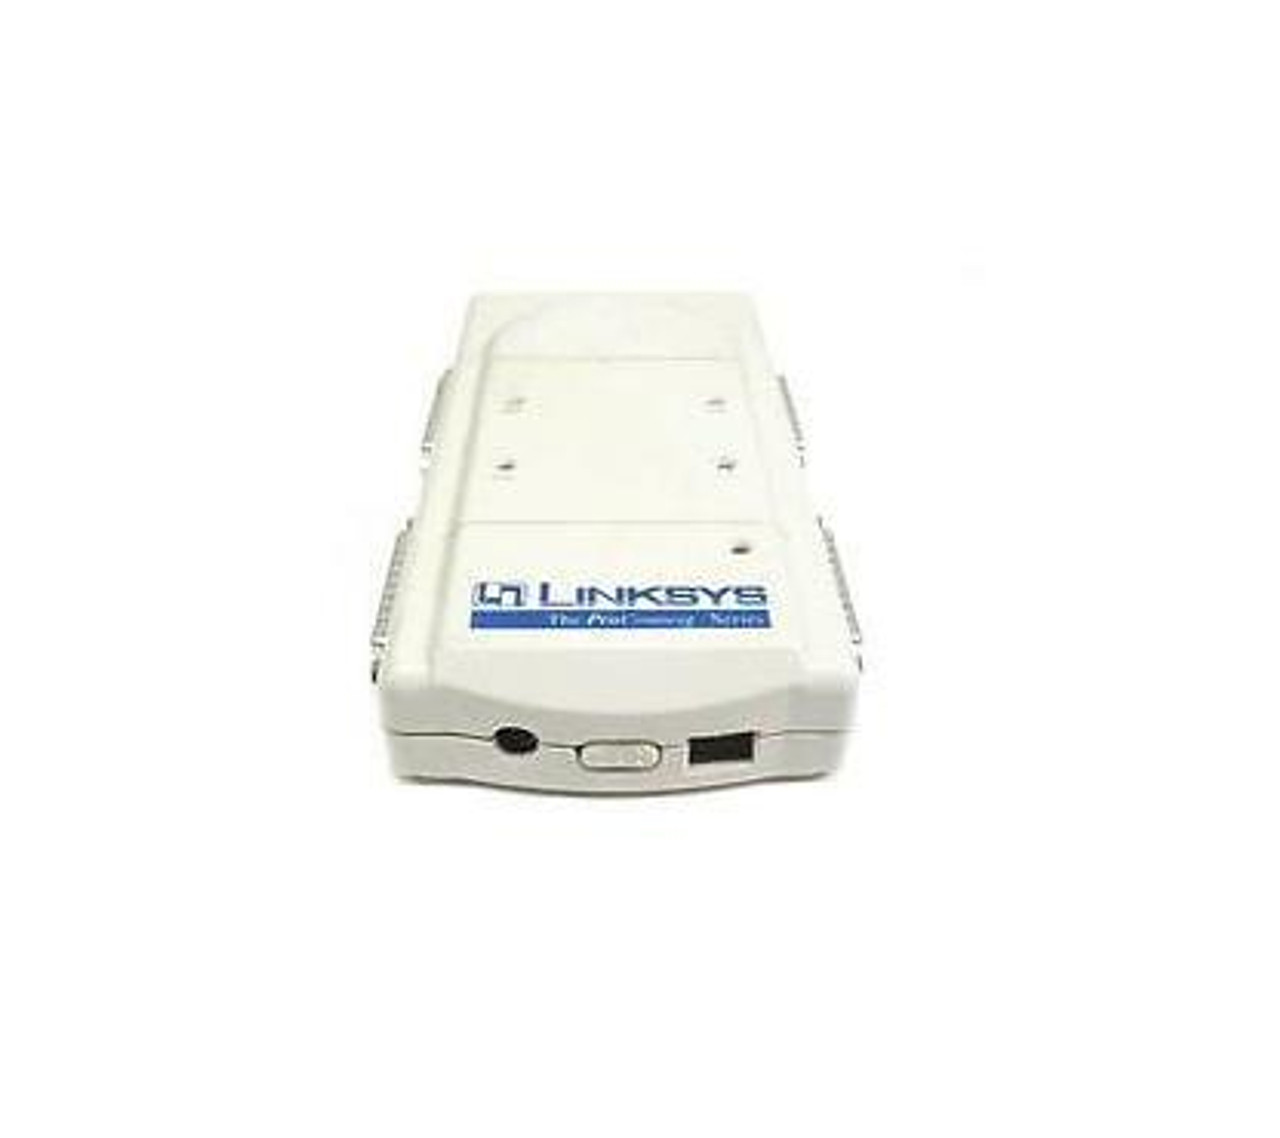 DCASR12 Linksys Reversible Bi-direction 2-Ports DB-25 IEEE Auto Switch (Refurbished)